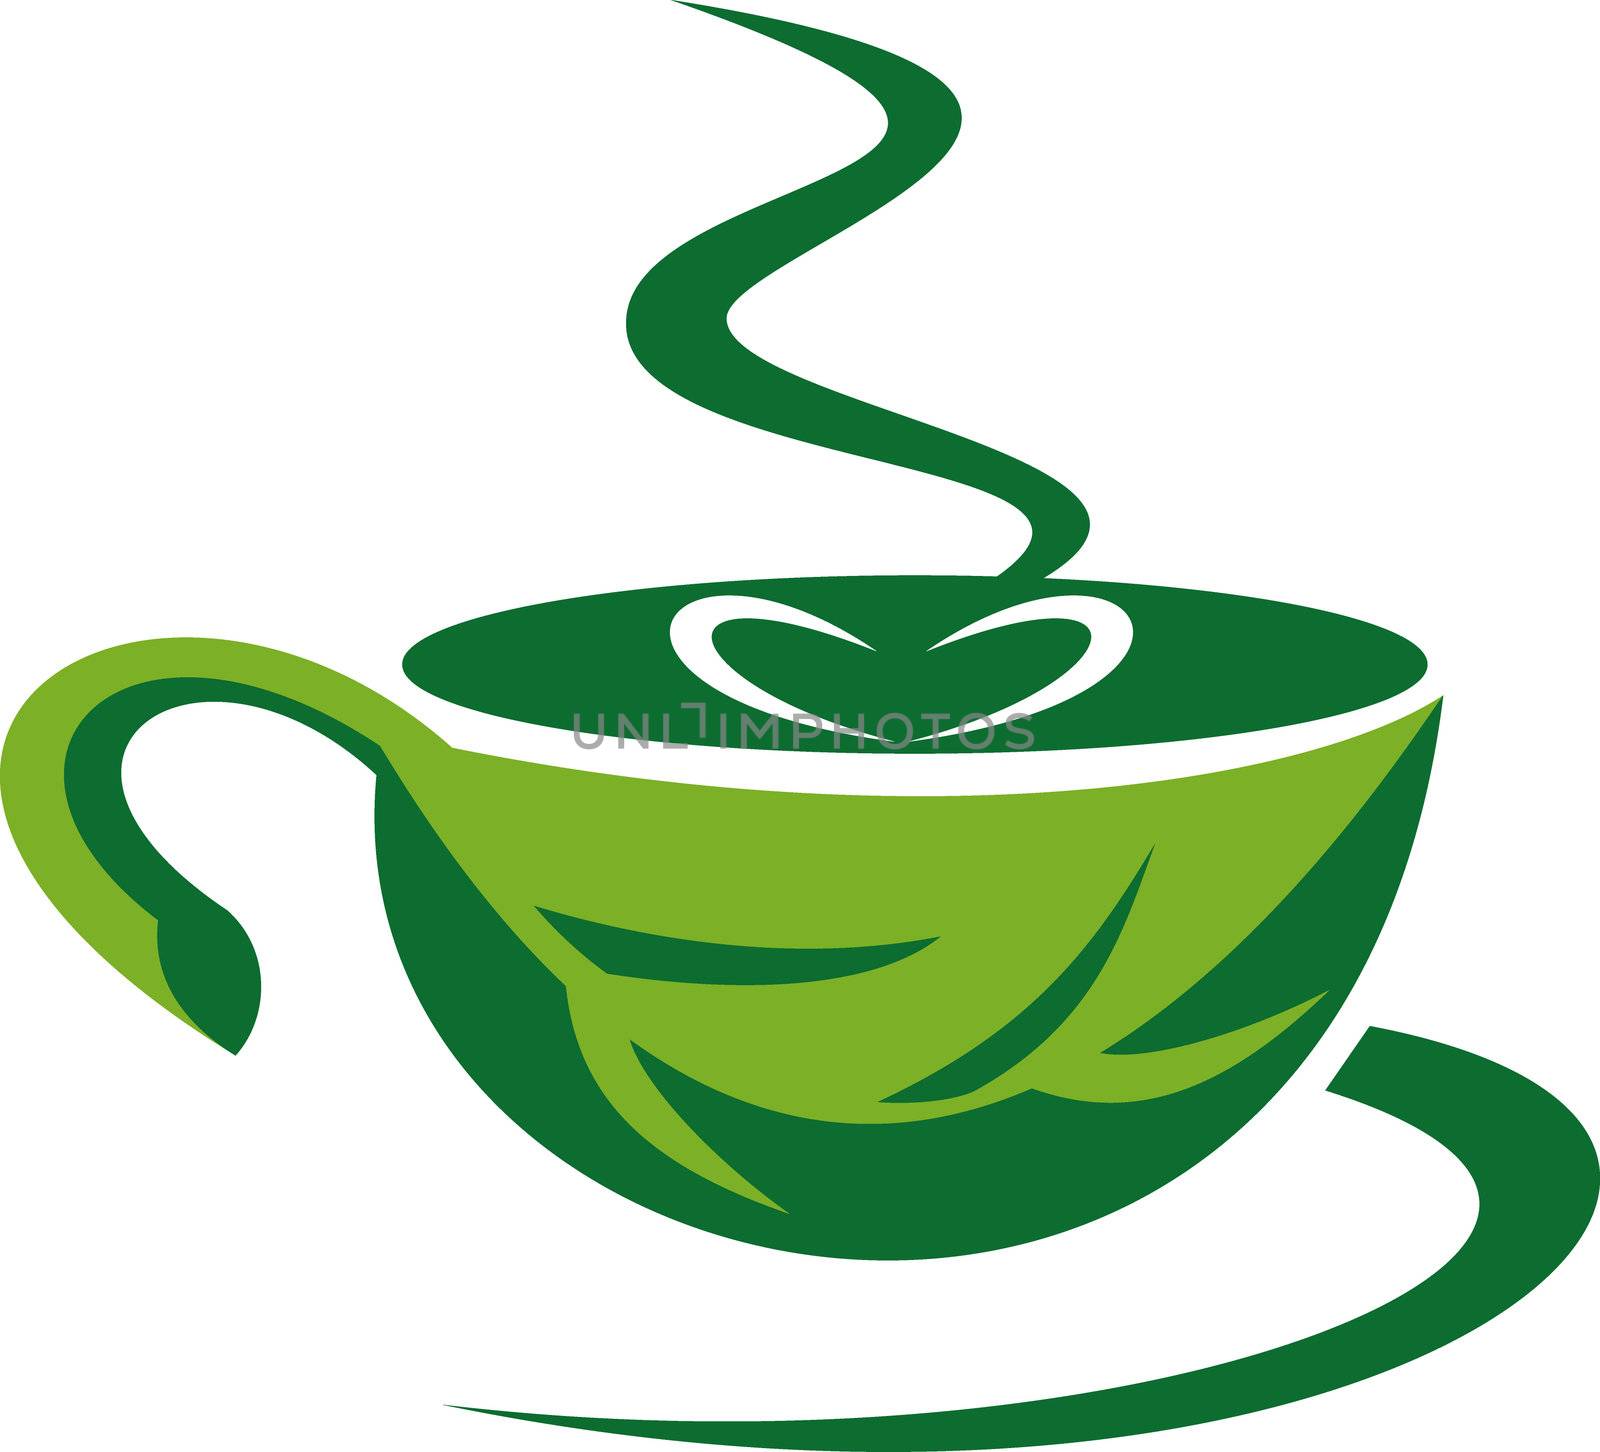 Imagery shows a steaming coffee cup made out of a green leaf with heart